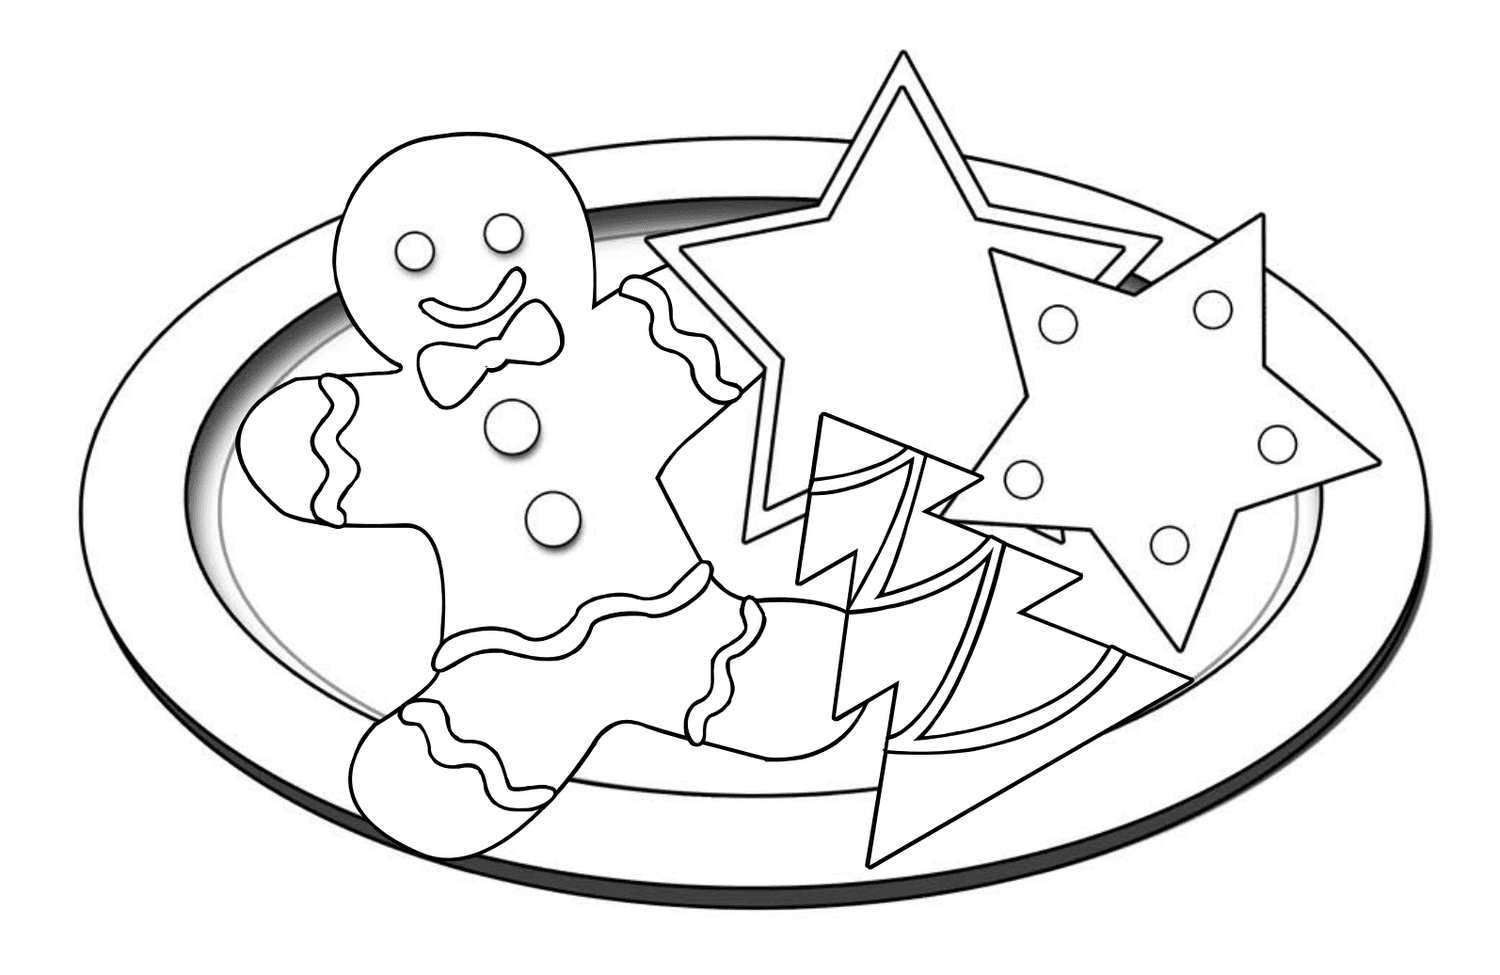 13 Printable Christmas Coloring Pages to Get Kids in the Holiday Spirit